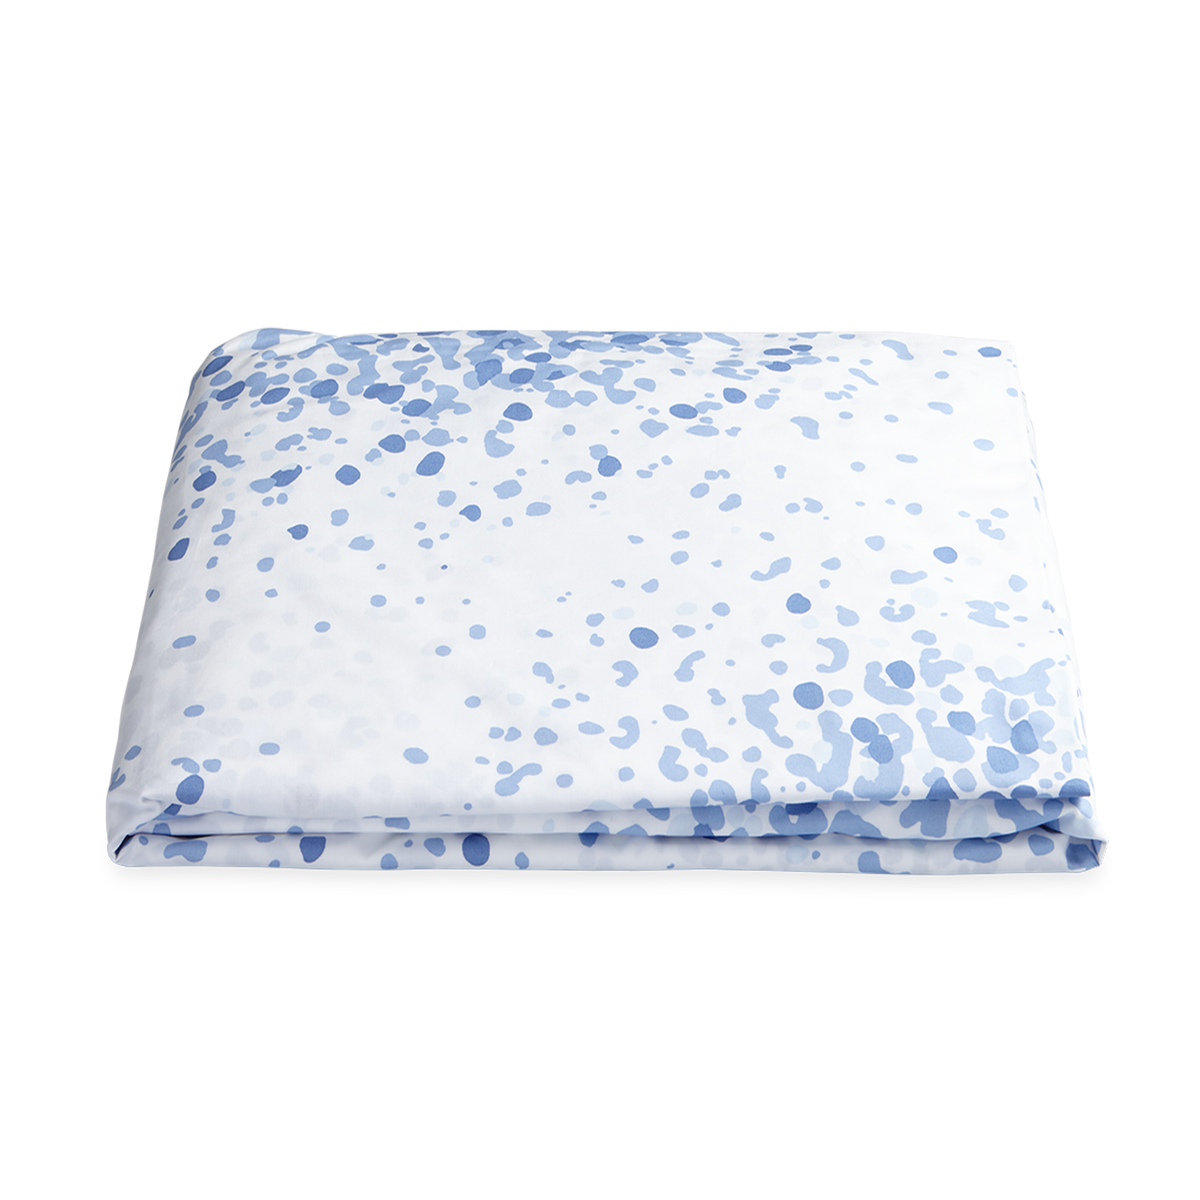 Folded Fitted Sheet of Matouk Poppy Bedding in Azure Color